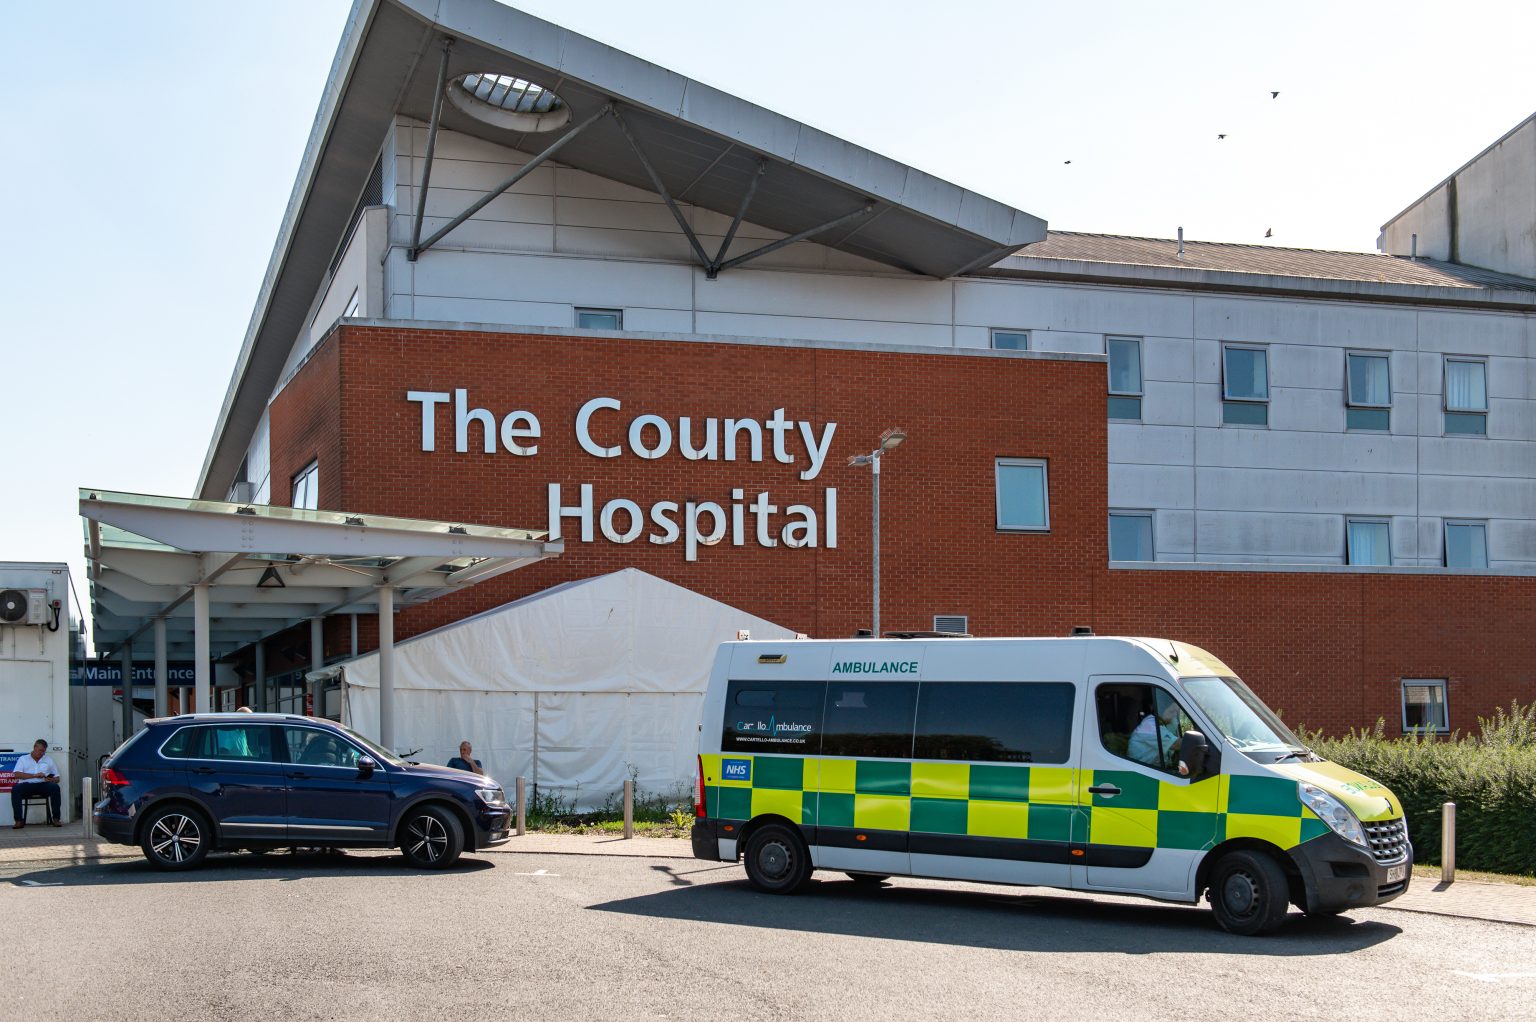 NEWS | Wye Valley NHS Trust issues update as visiting suspended on Frome Ward due to COVID-19 cases